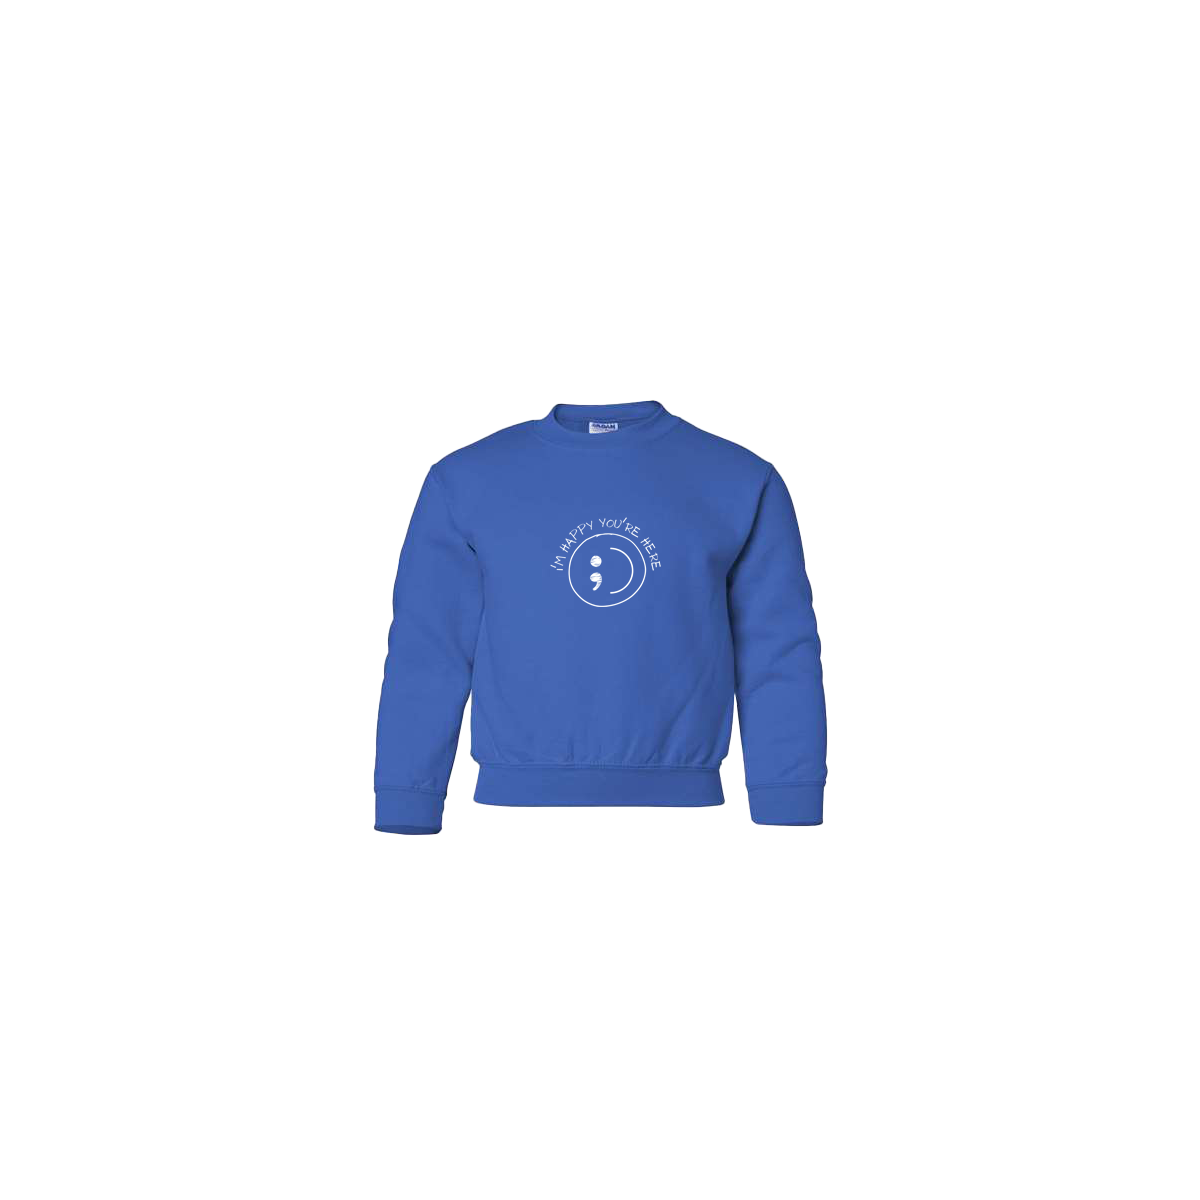 I'm Happy You're Here Embroidered Royal Blue Youth Crewneck